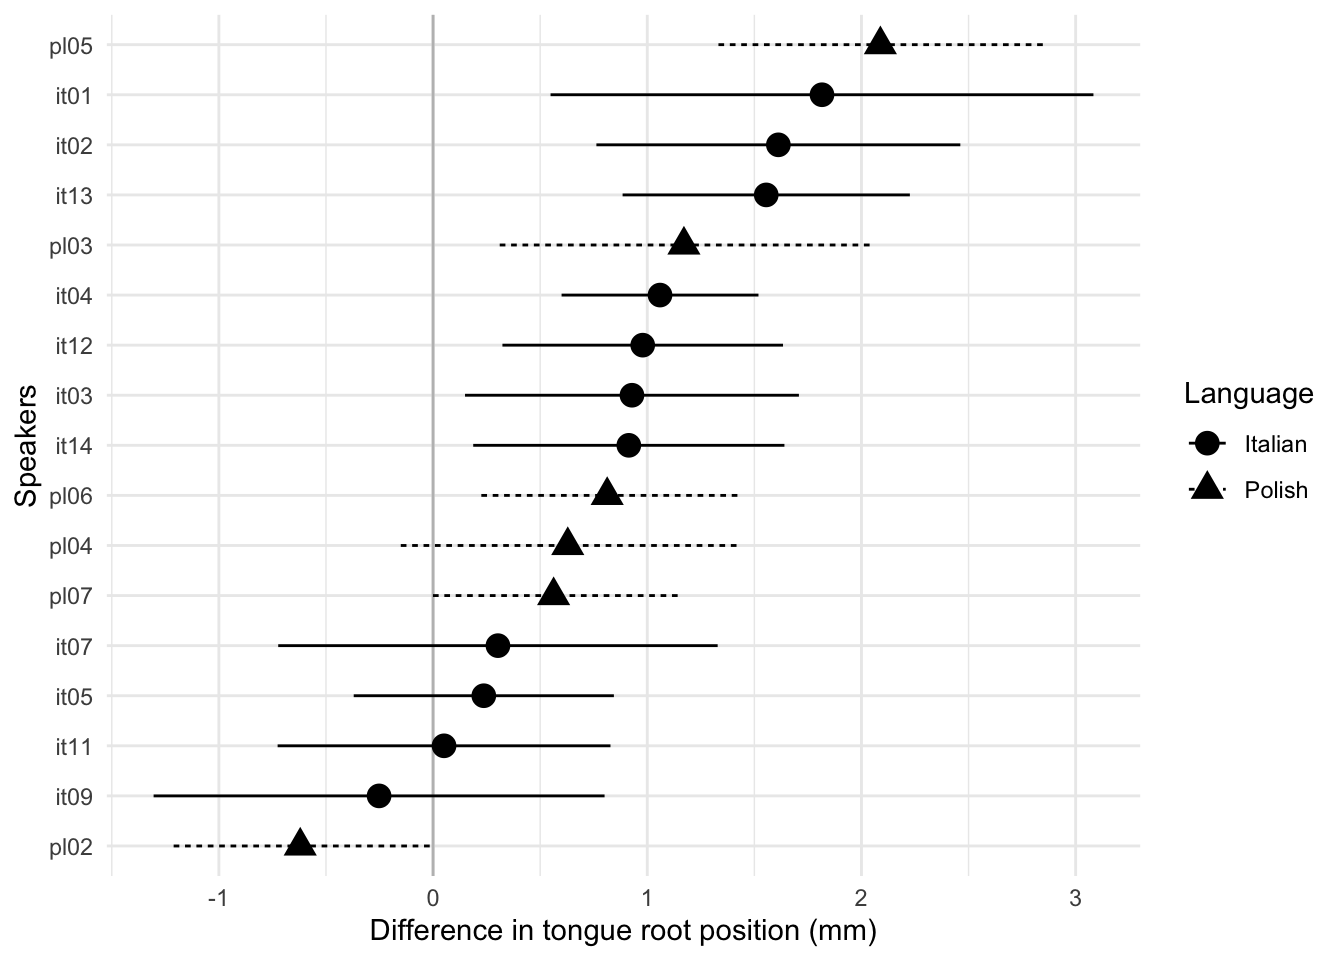 By-speaker raw mean difference in tongue root position between voiceless and voiced stops at closure onset (in millimetres). The horizontal segments are the standard errors of the mean differences.